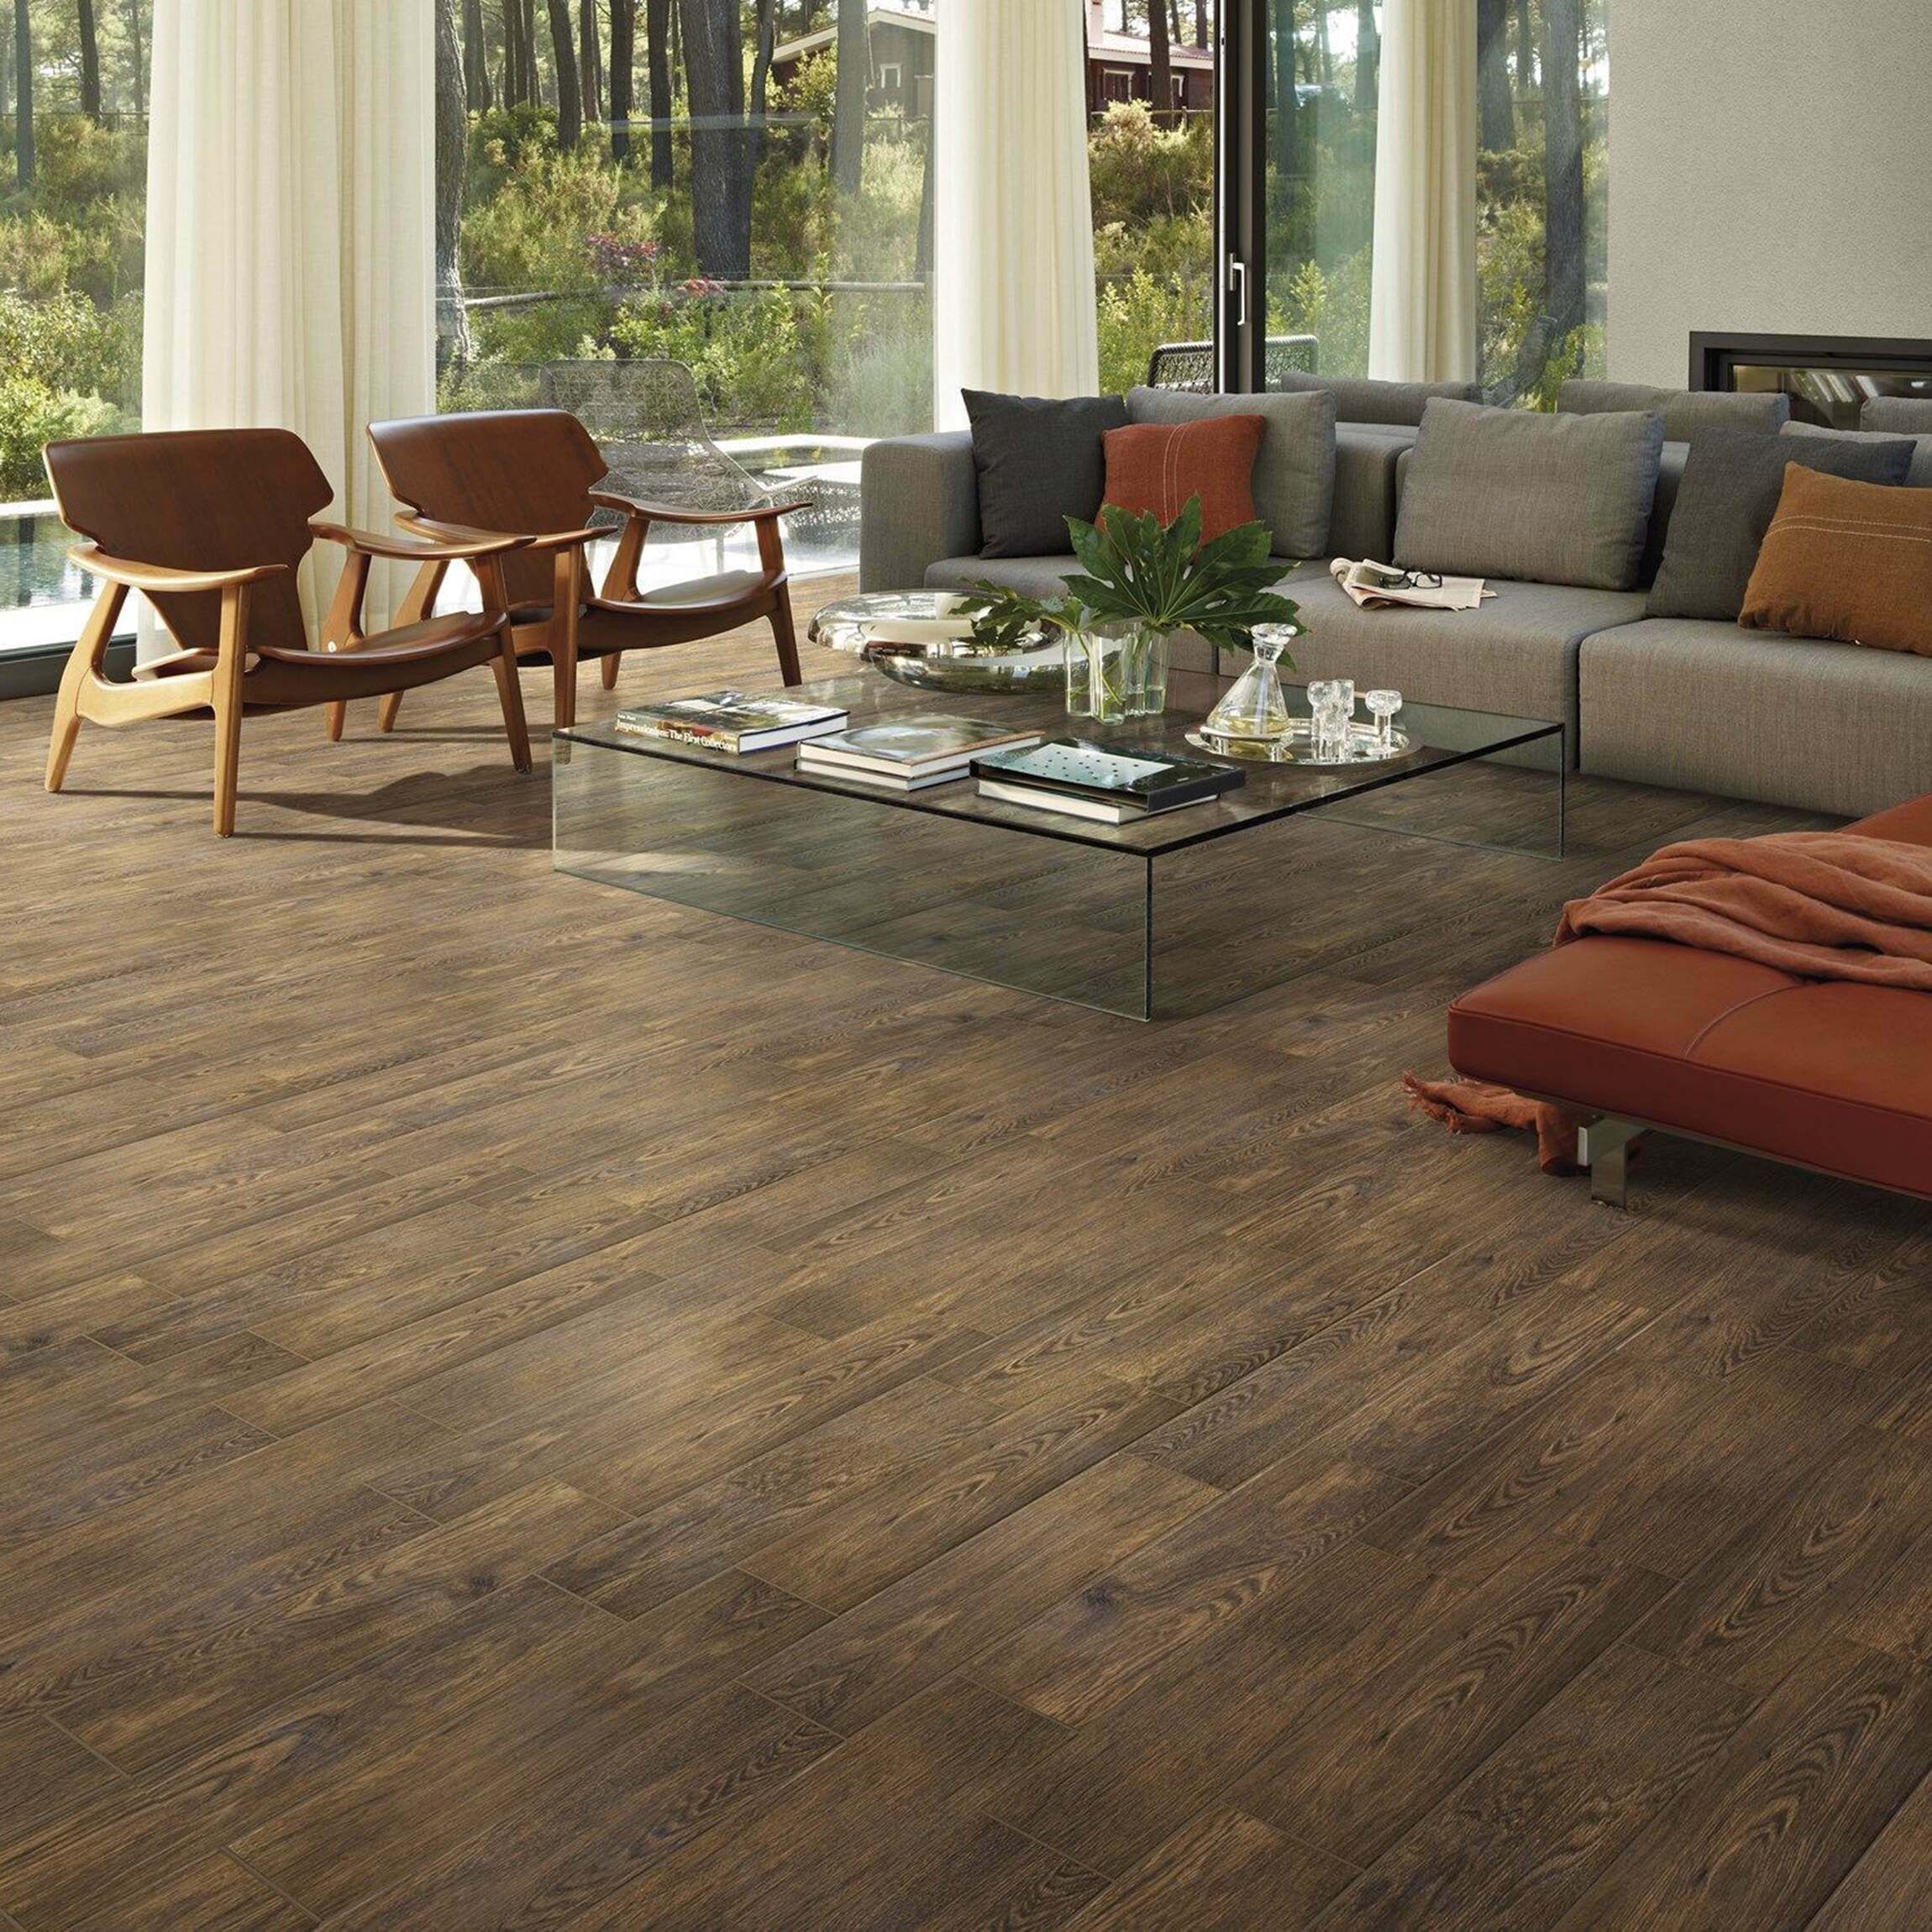 Floor Tiles From Tile Mountain, Wood And Tile Floor